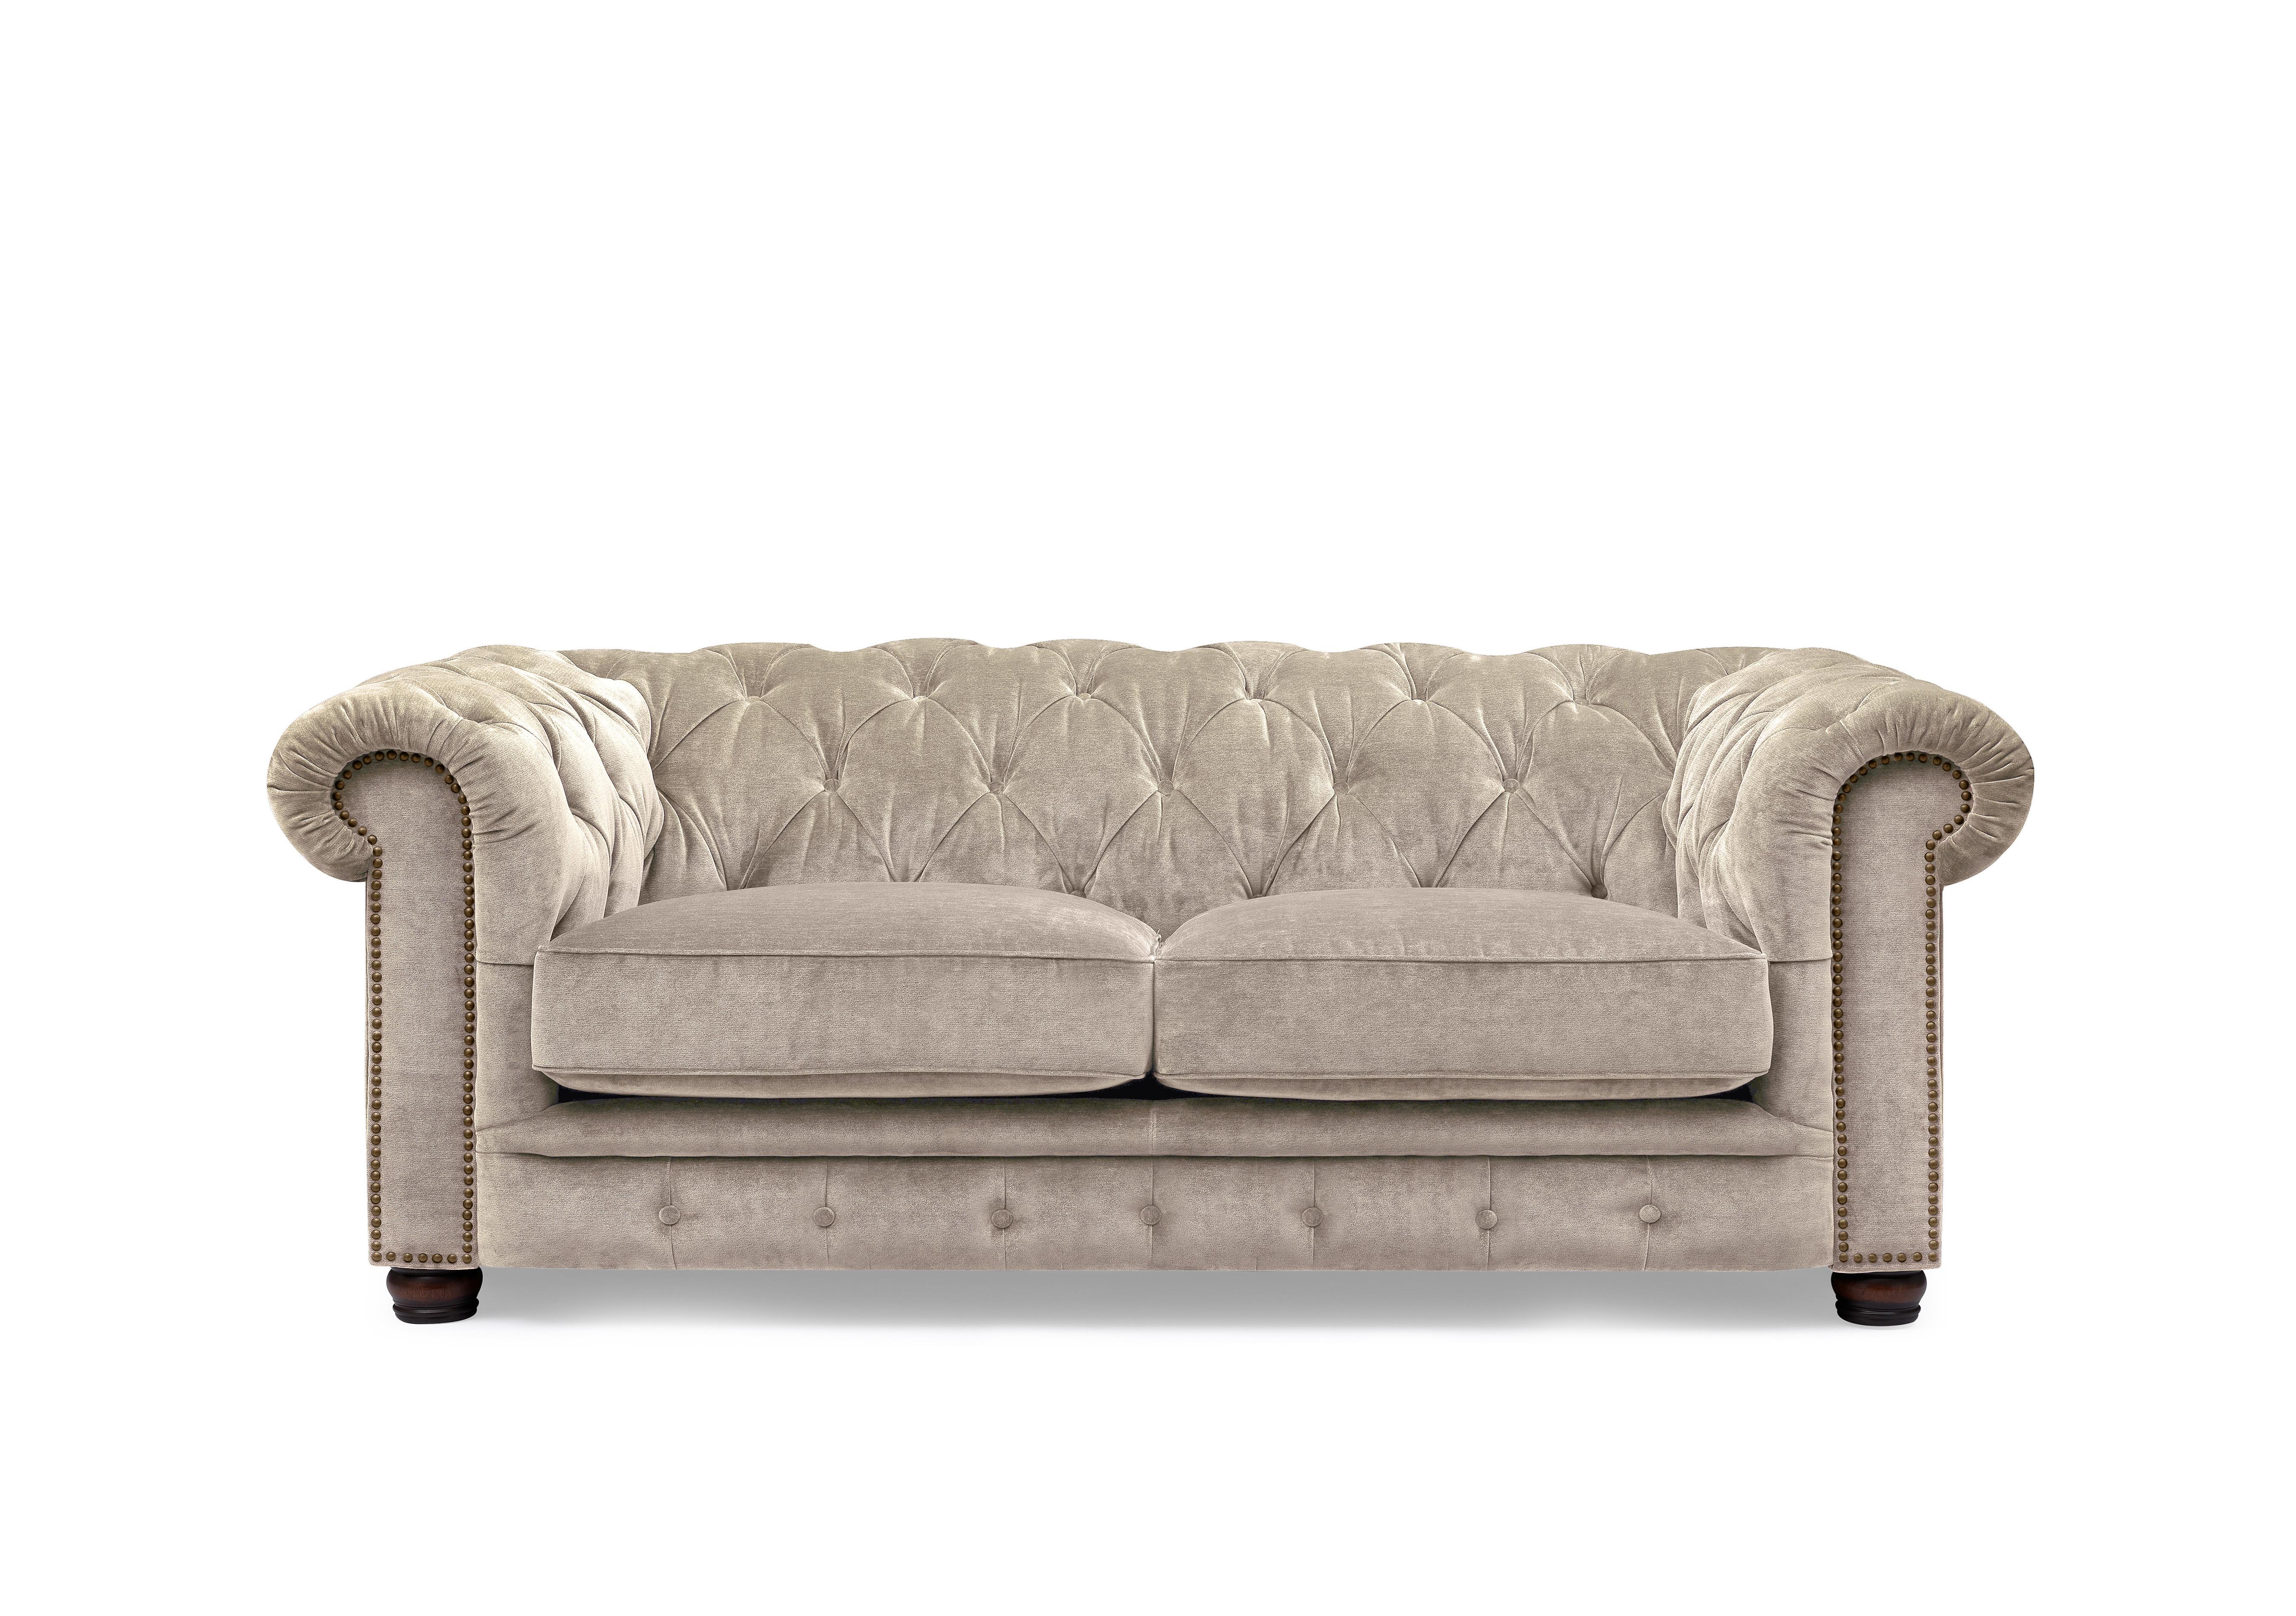 Shackleton 3 Seater Fabric Chesterfield Sofa in X3y1-W022 Barley on Furniture Village